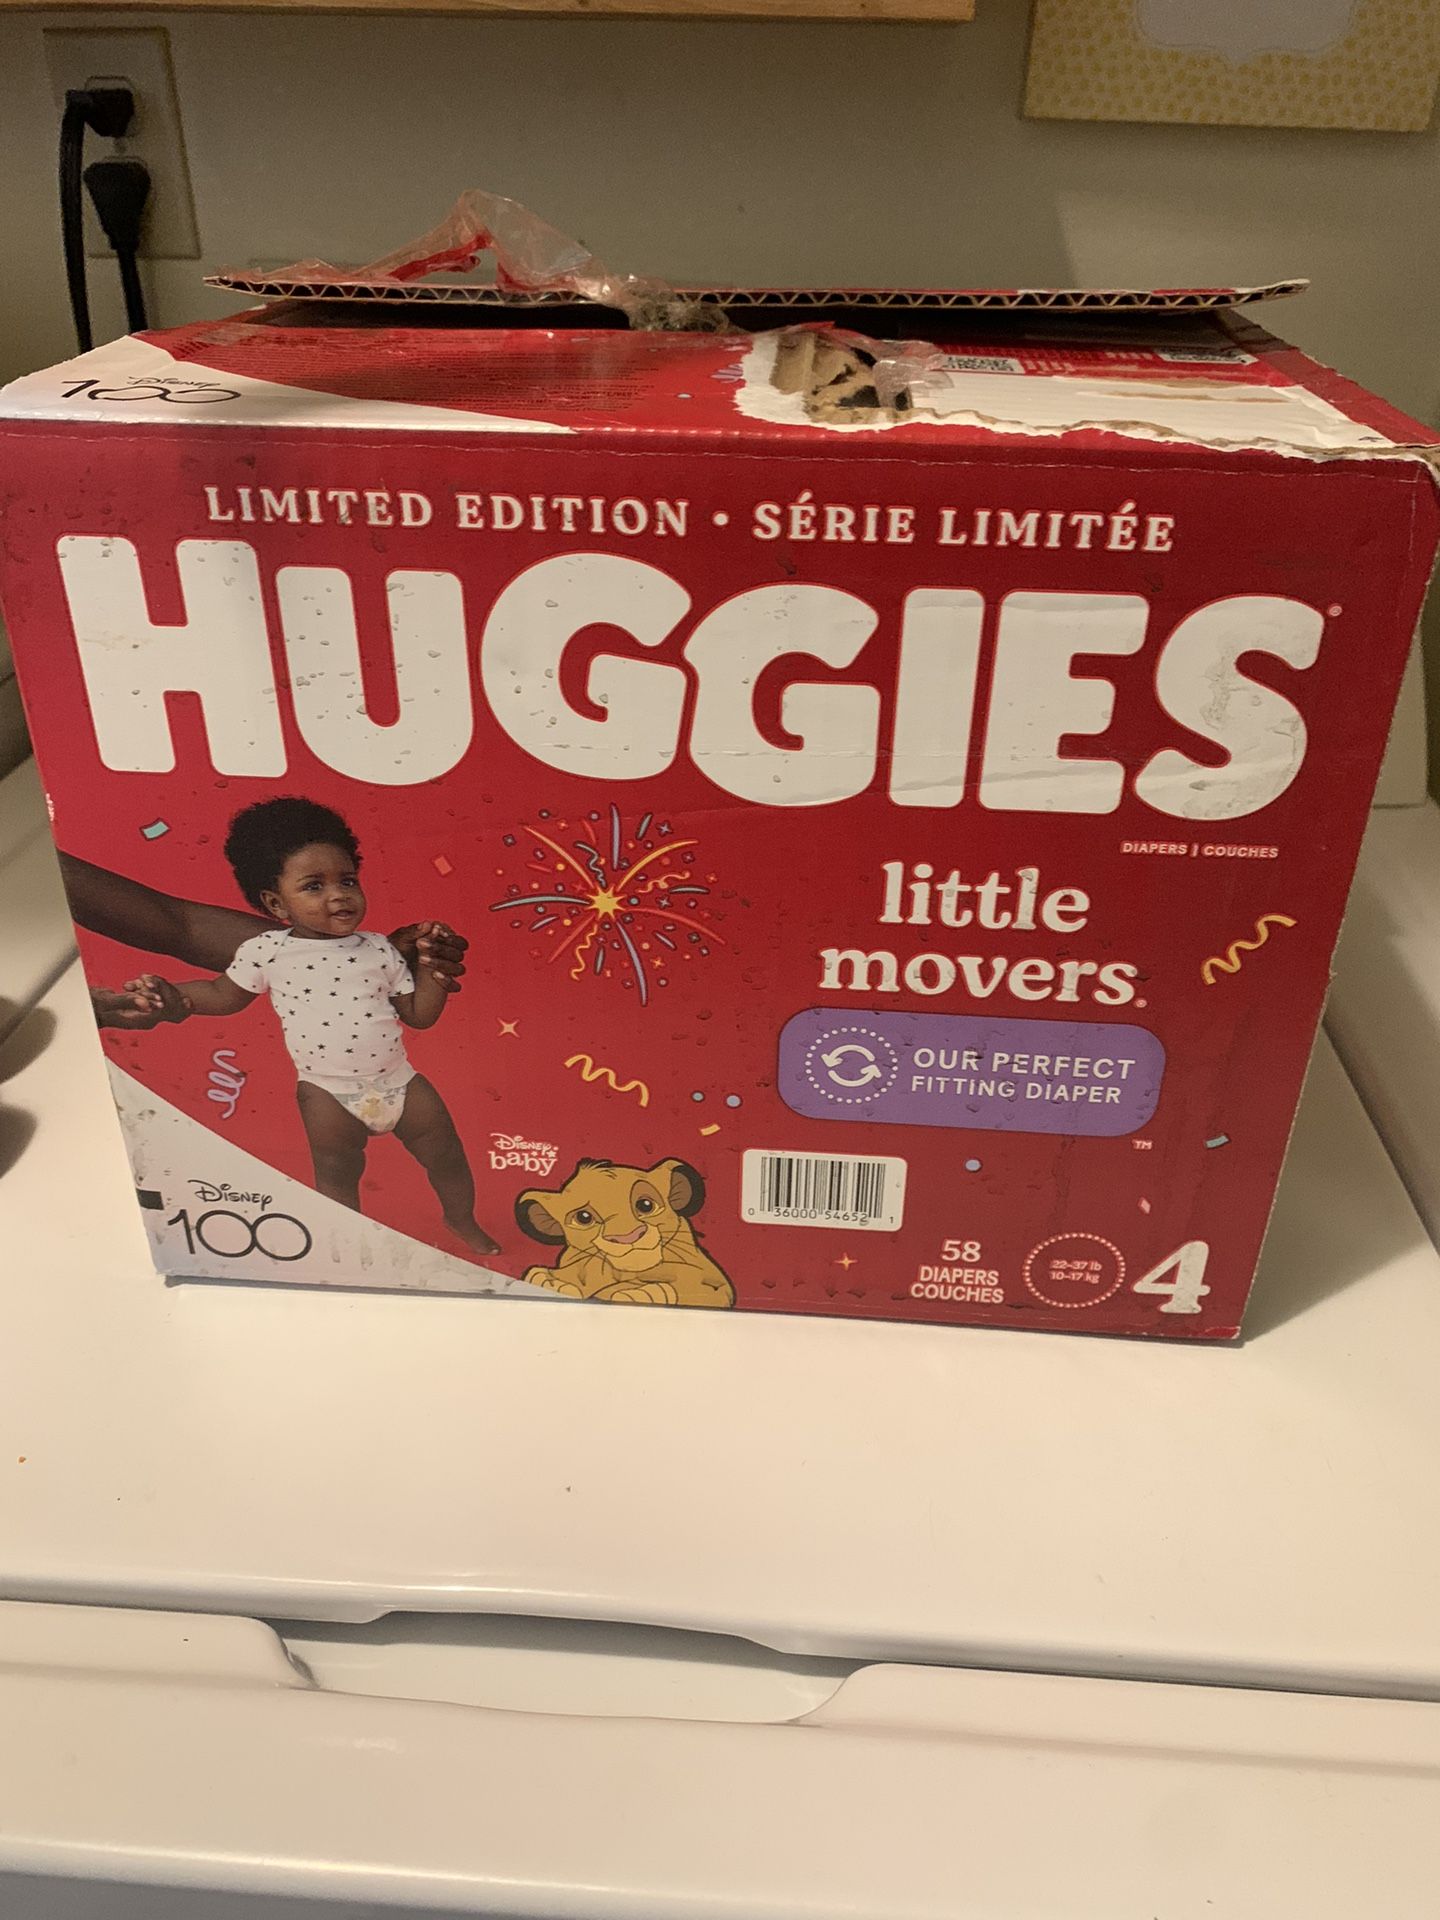 Unopened Diapers, Damaged Box